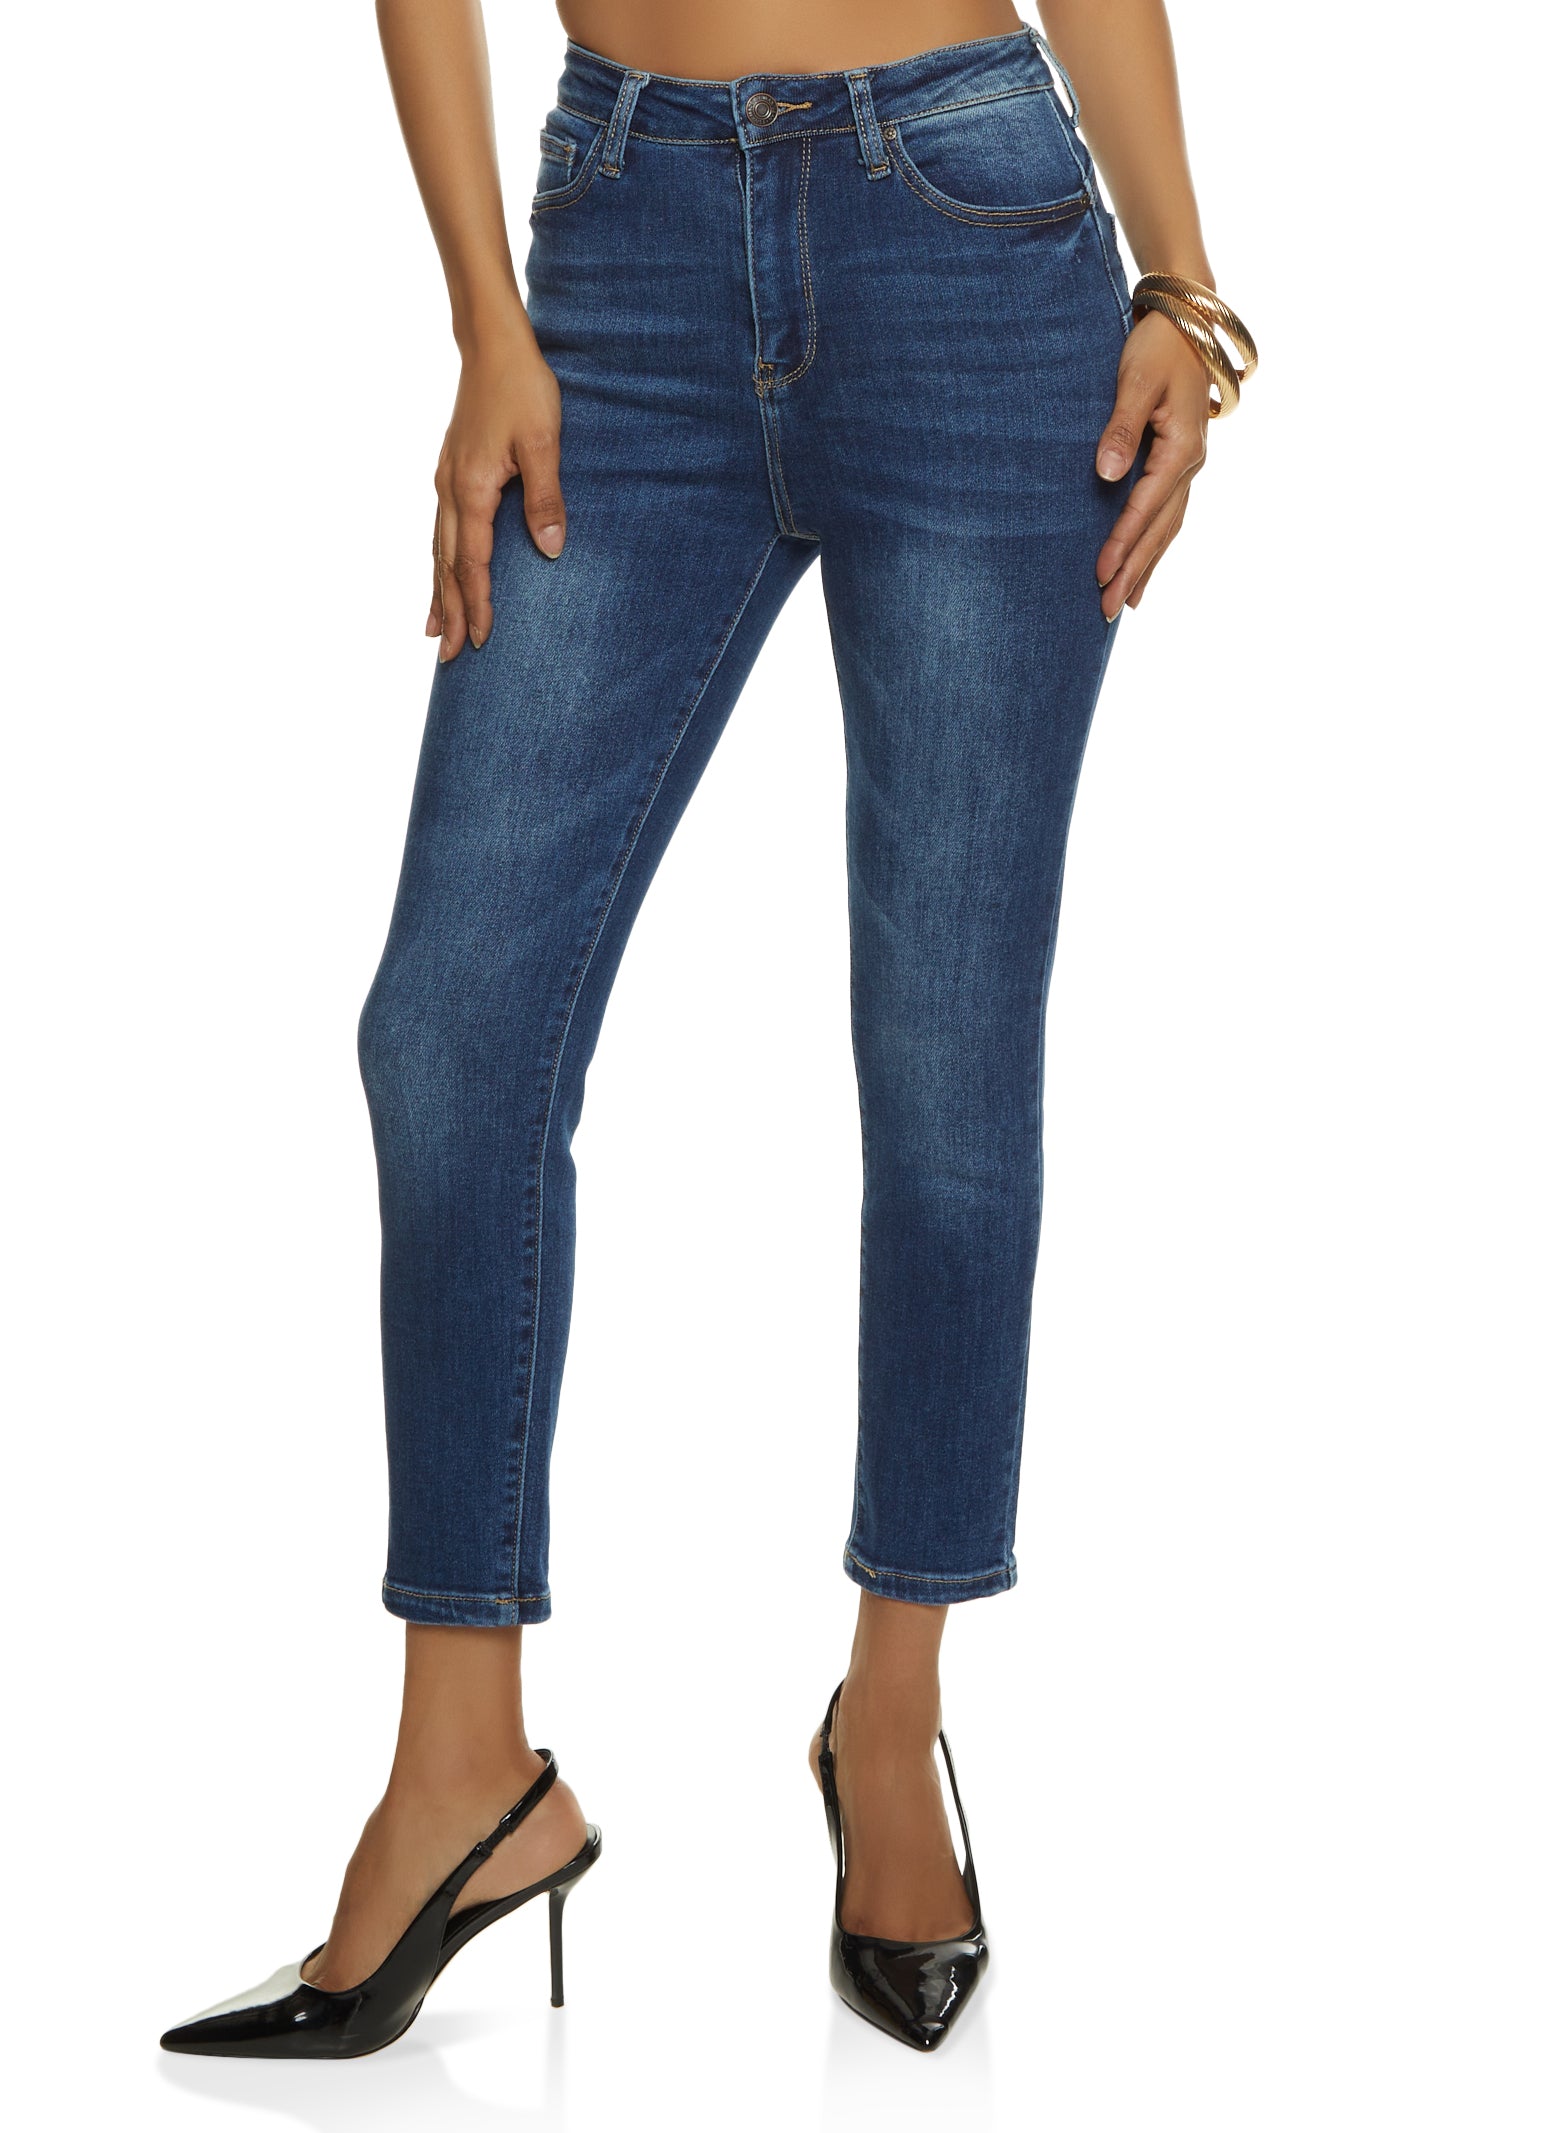 WAX Whiskered Cropped Skinny Jeans